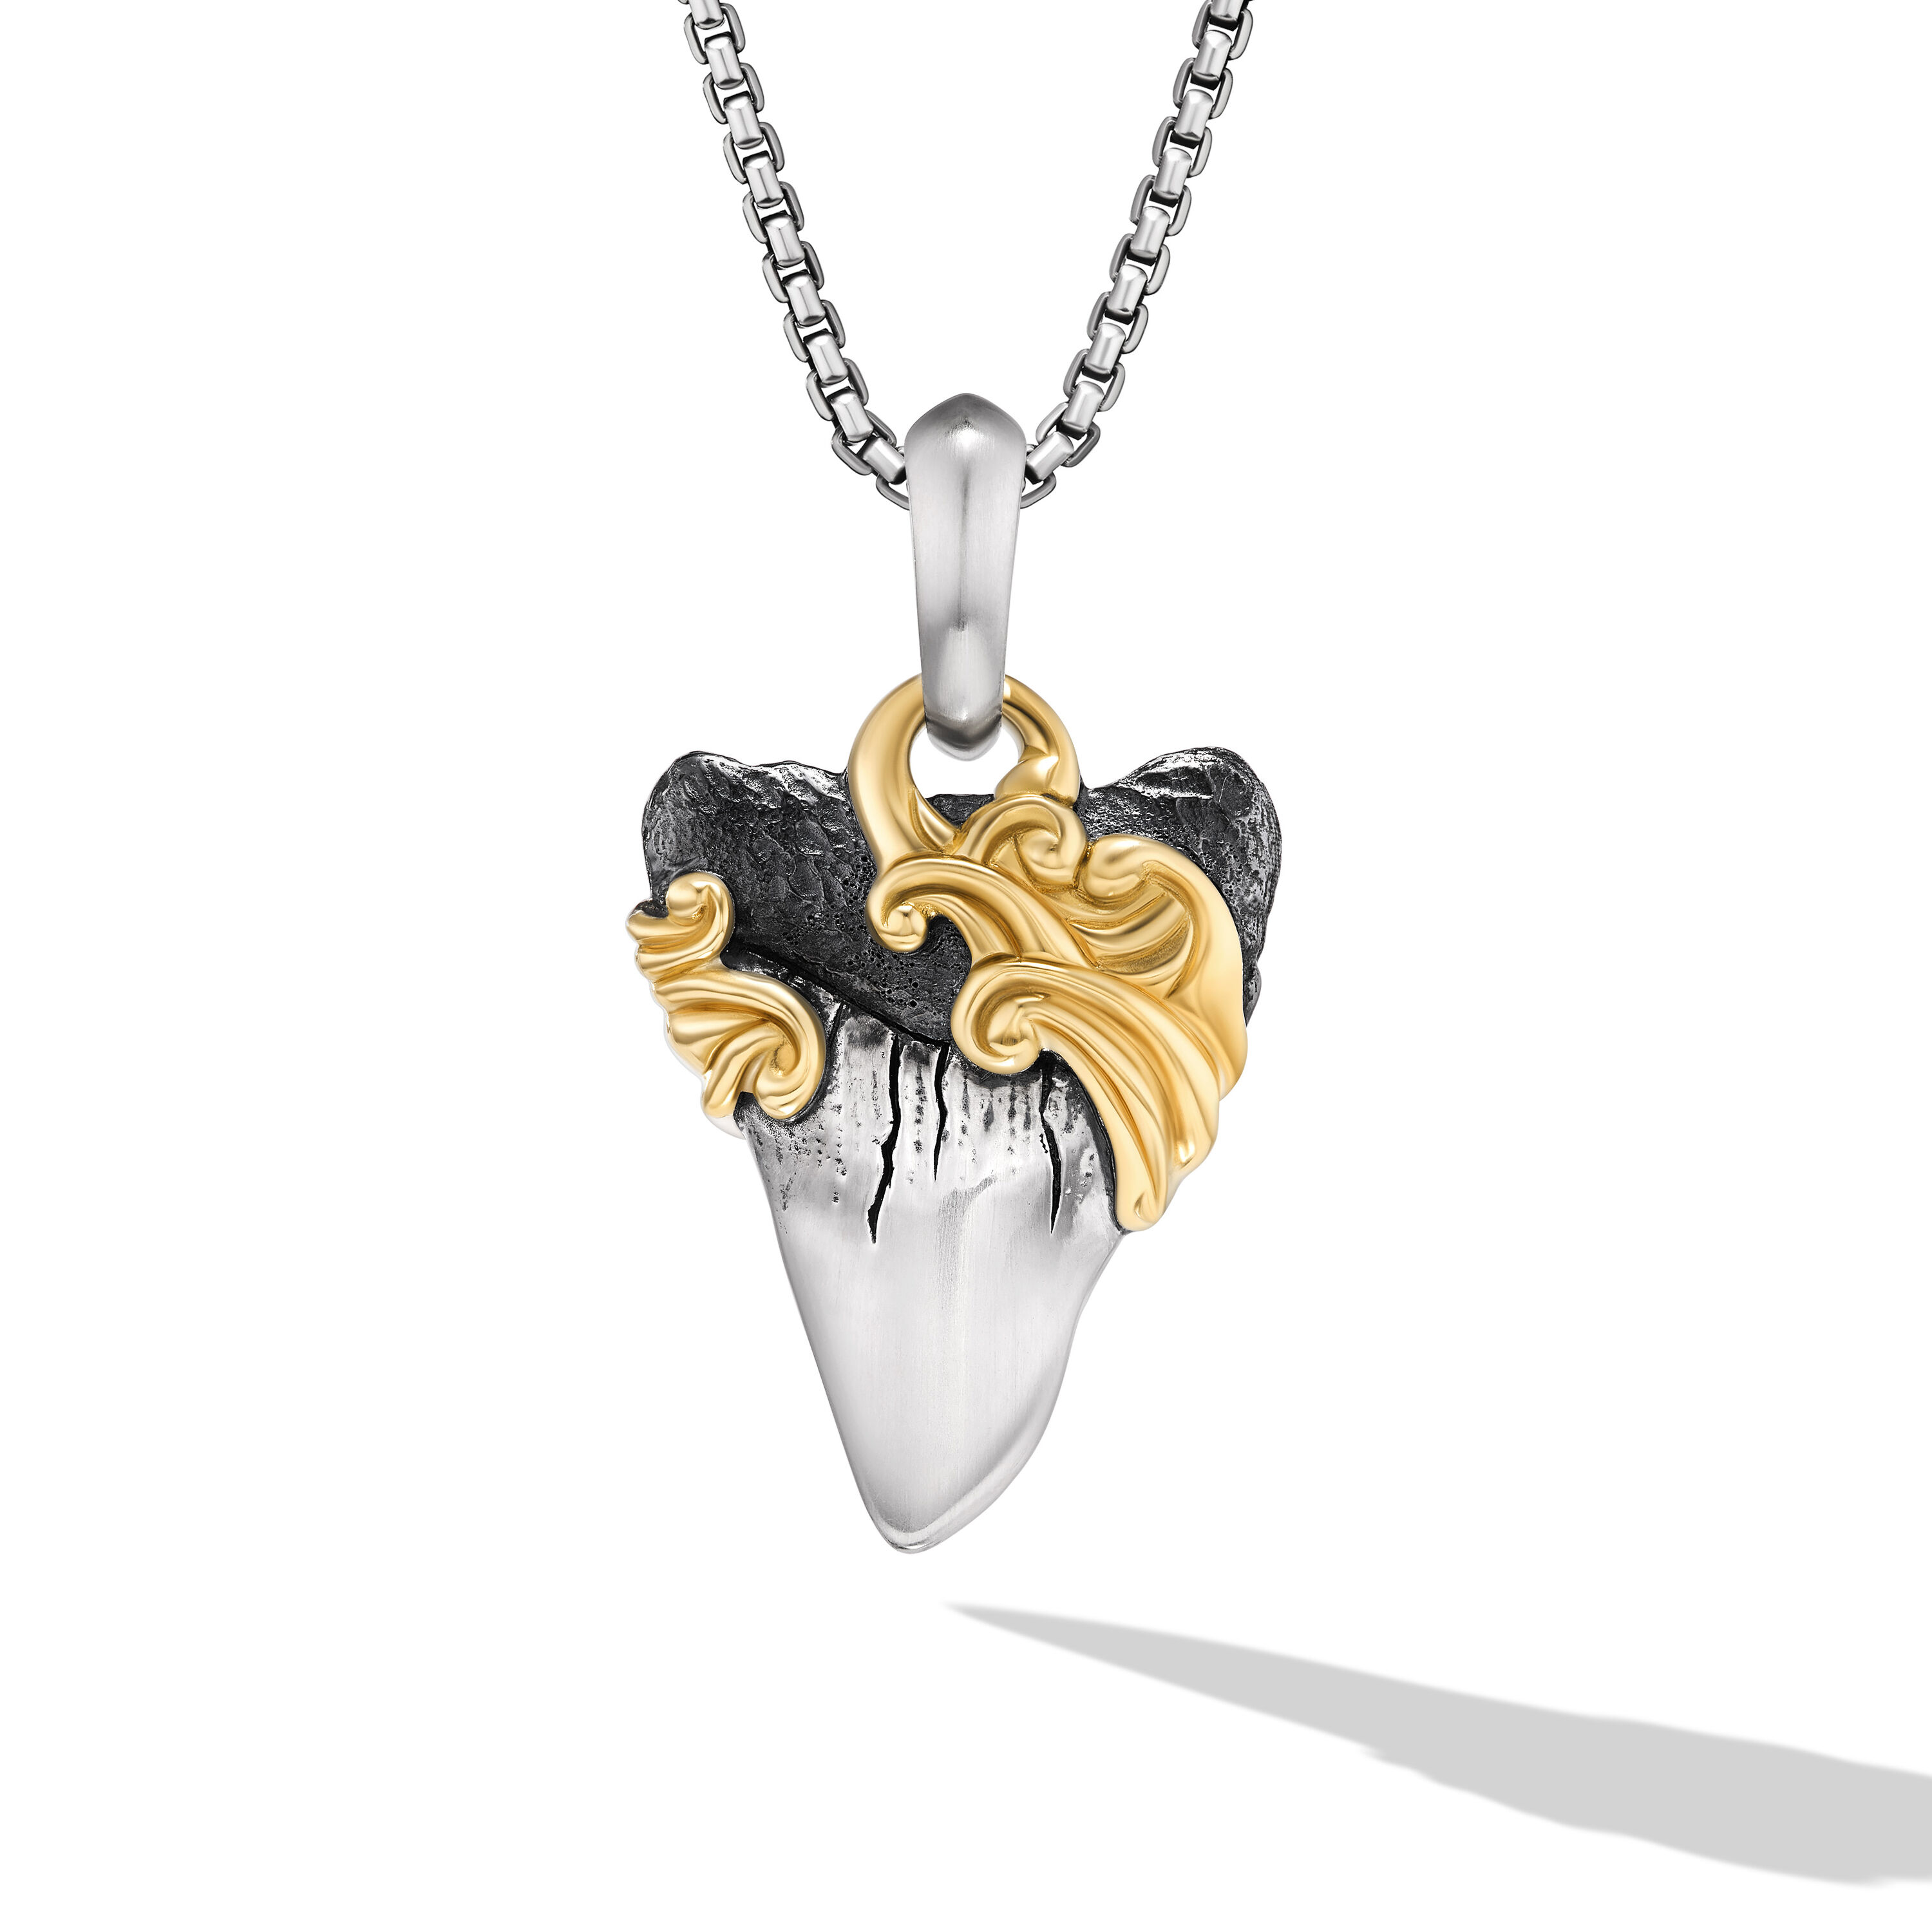 Waves Shark Tooth Amulet in Sterling Silver with 18K Yellow Gold, 25mm